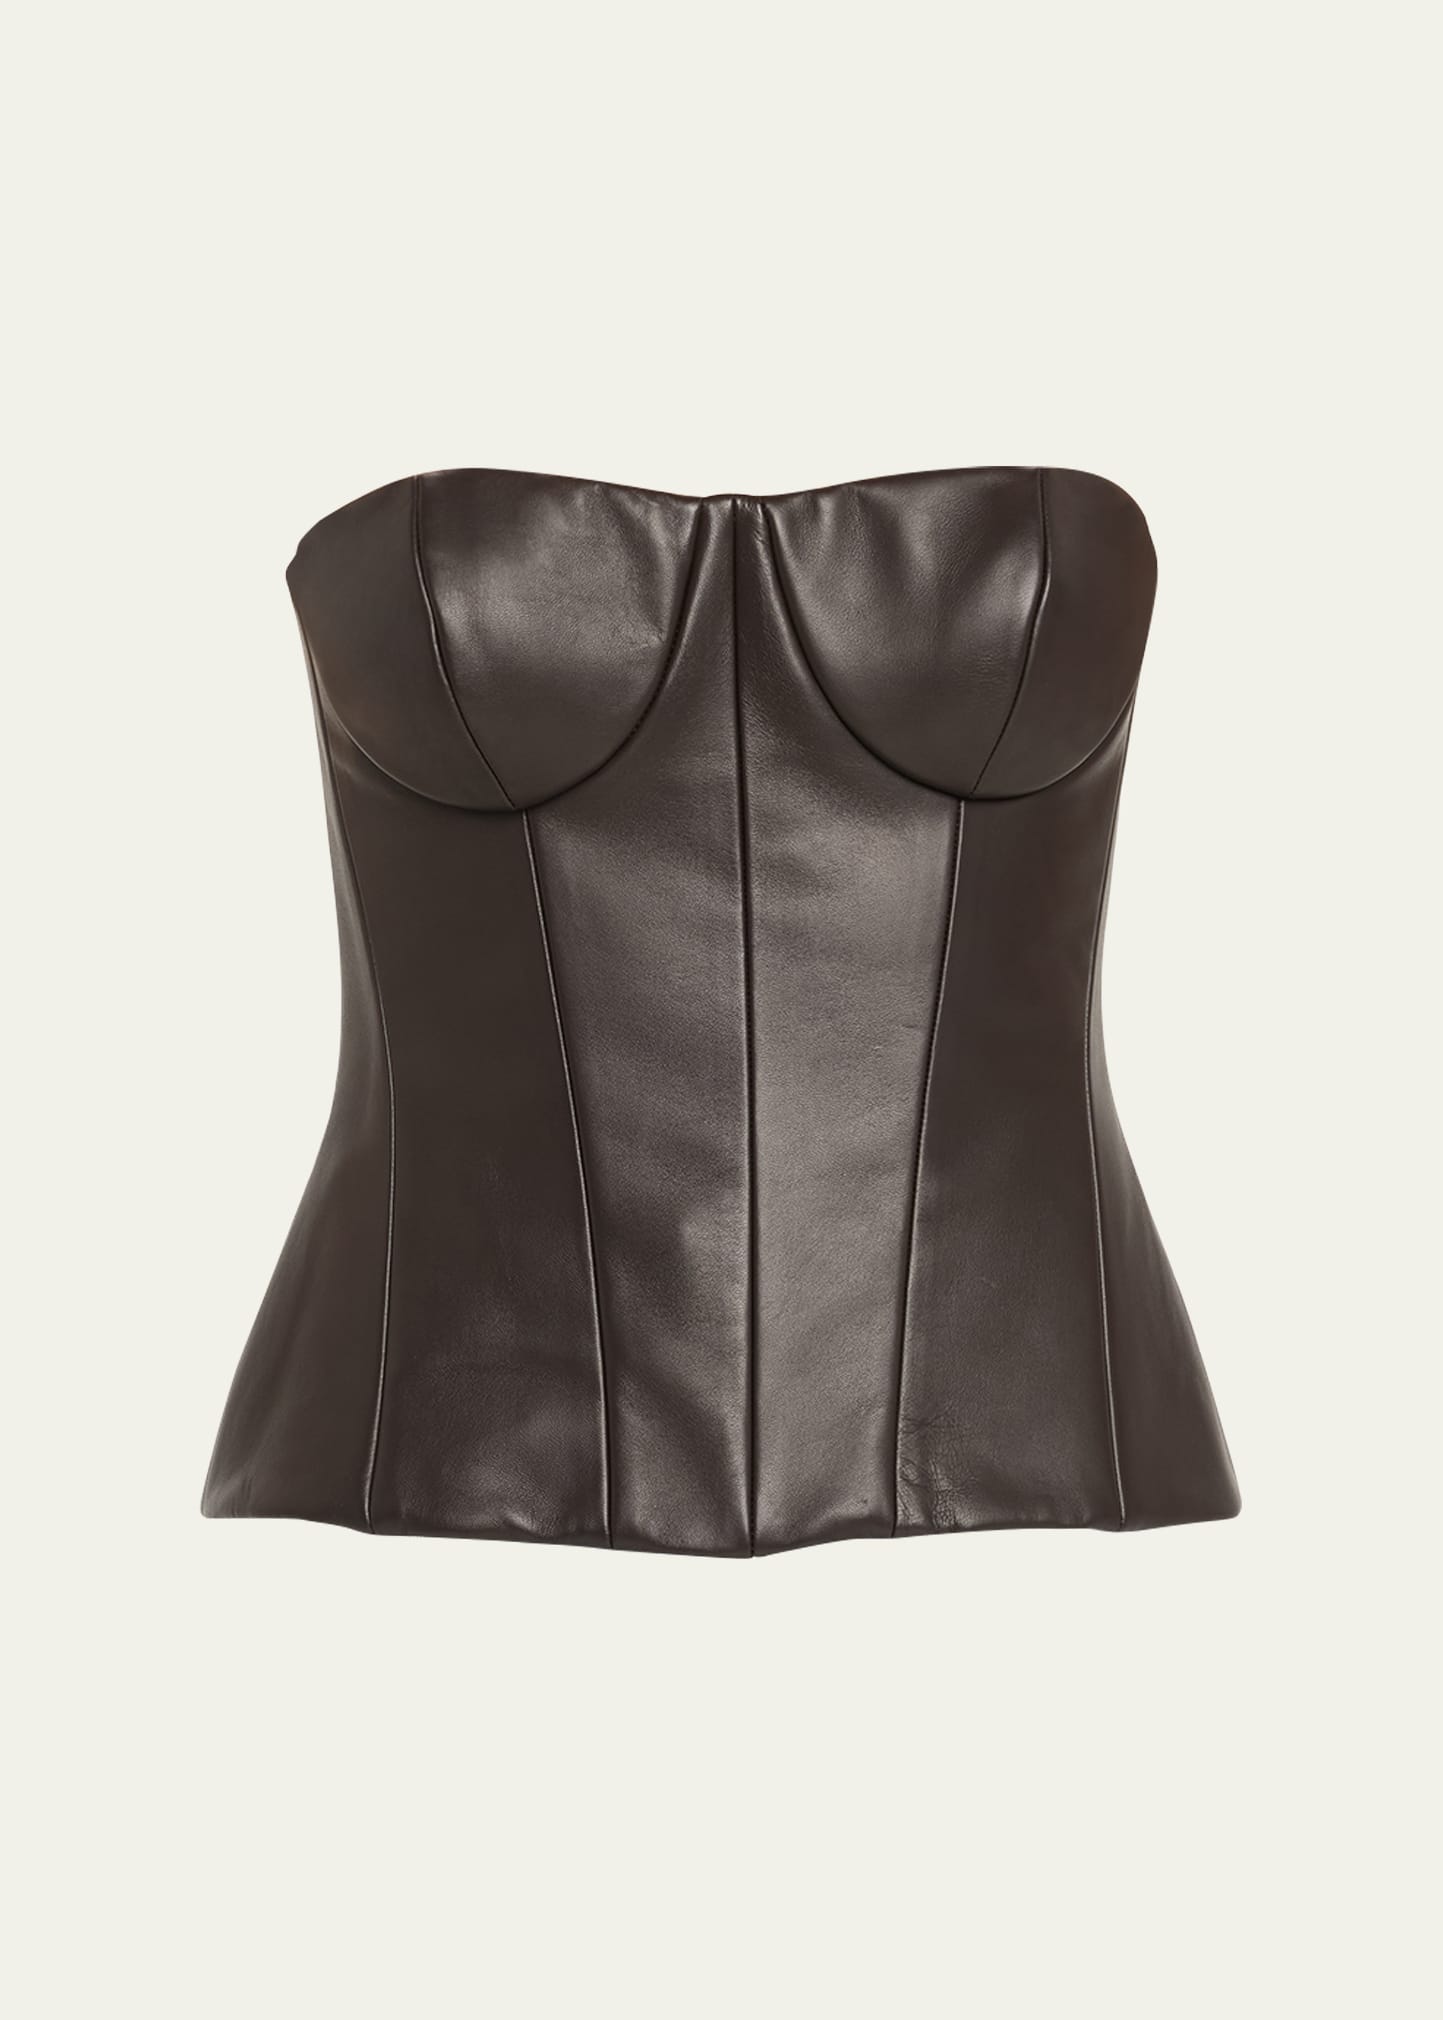 Sergio Hudson Leather Bustier Top